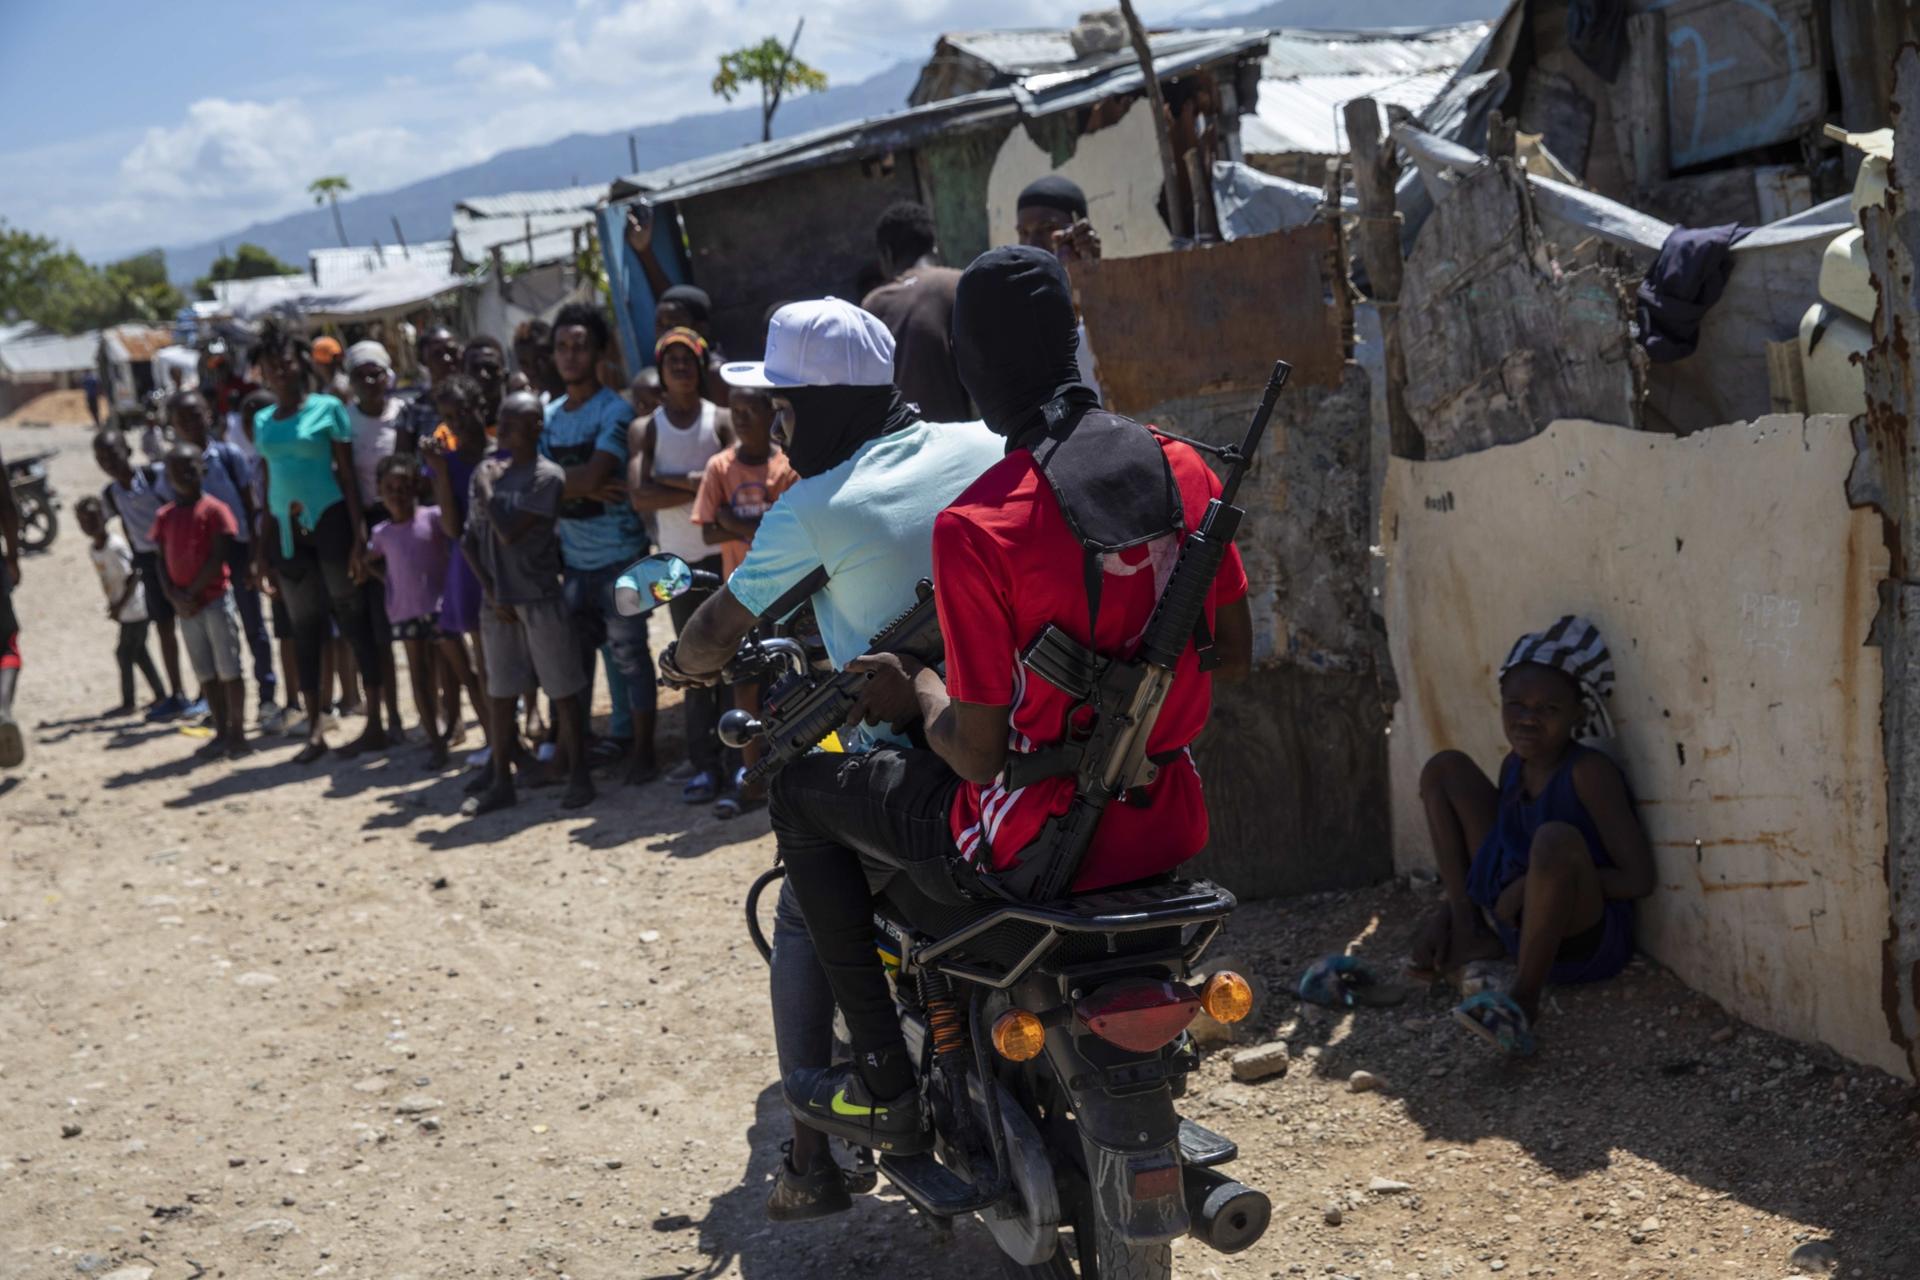 G9 coalition gang members ride a motorcycle through the Wharf Jeremy street market in Port-au-Prince, Haiti, on Oct. 6, 2021. 